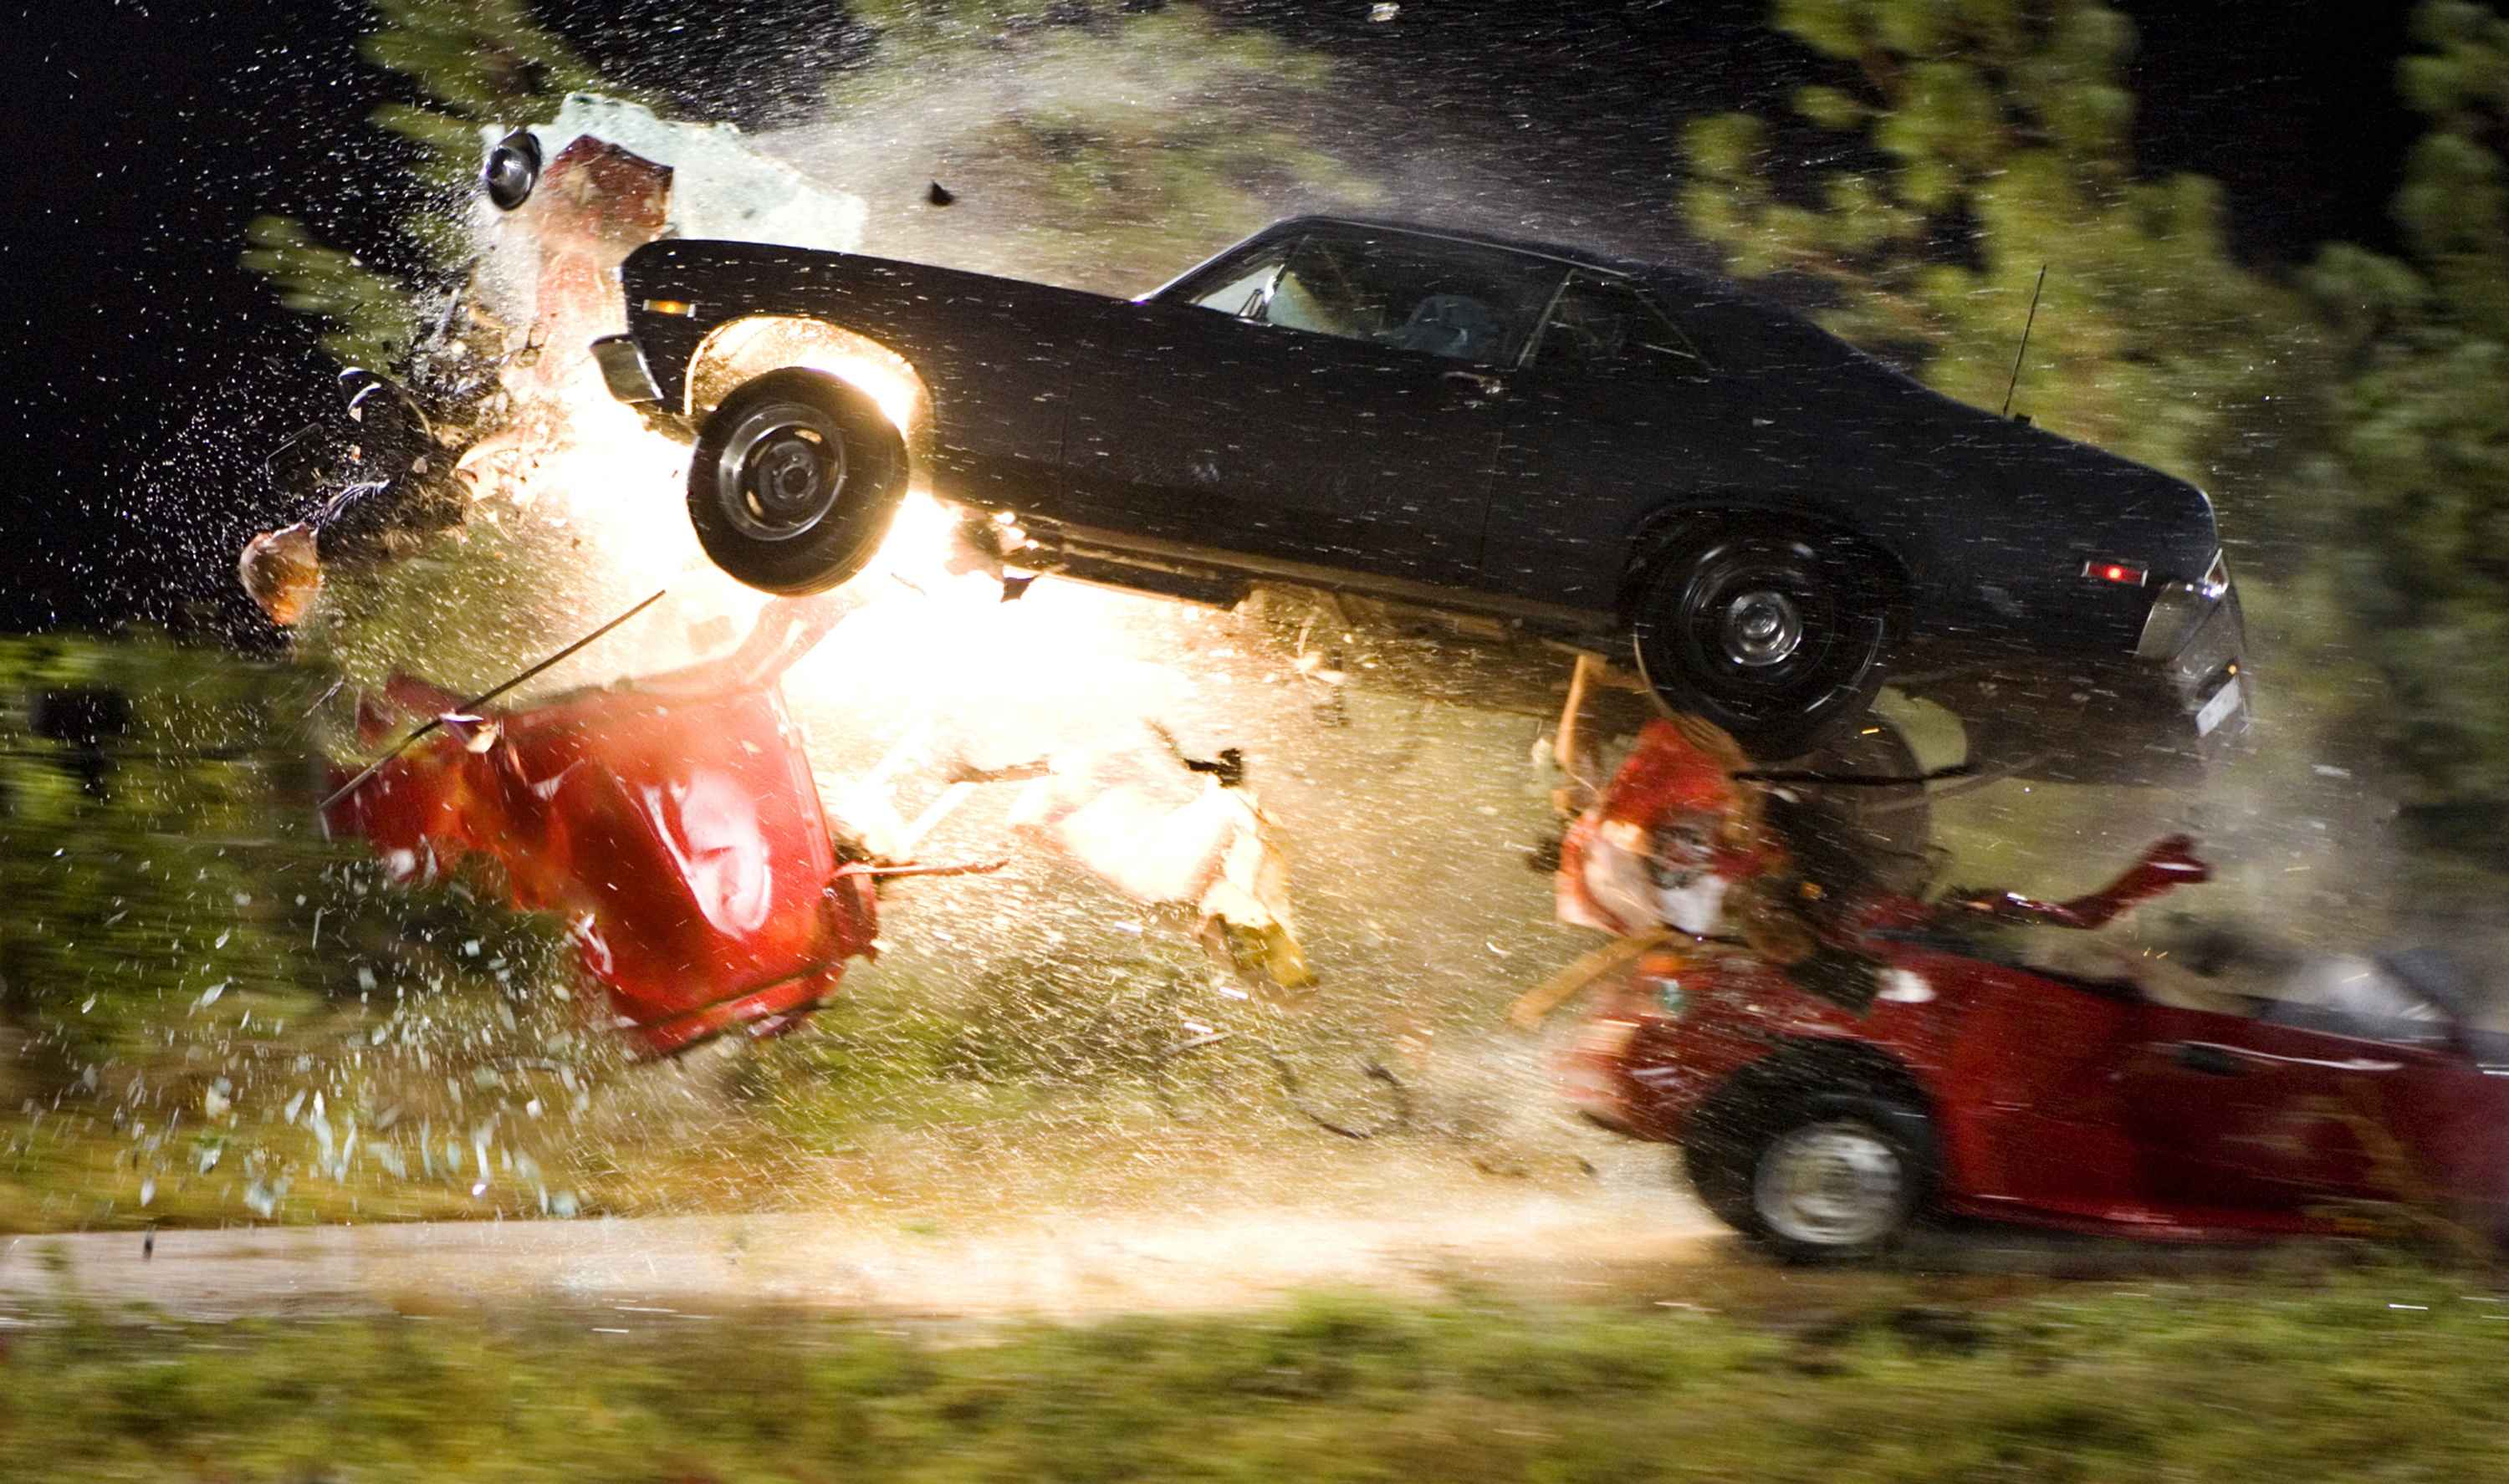 An explosive crash from Quentin Tarantino's Death Proof (Grind House).